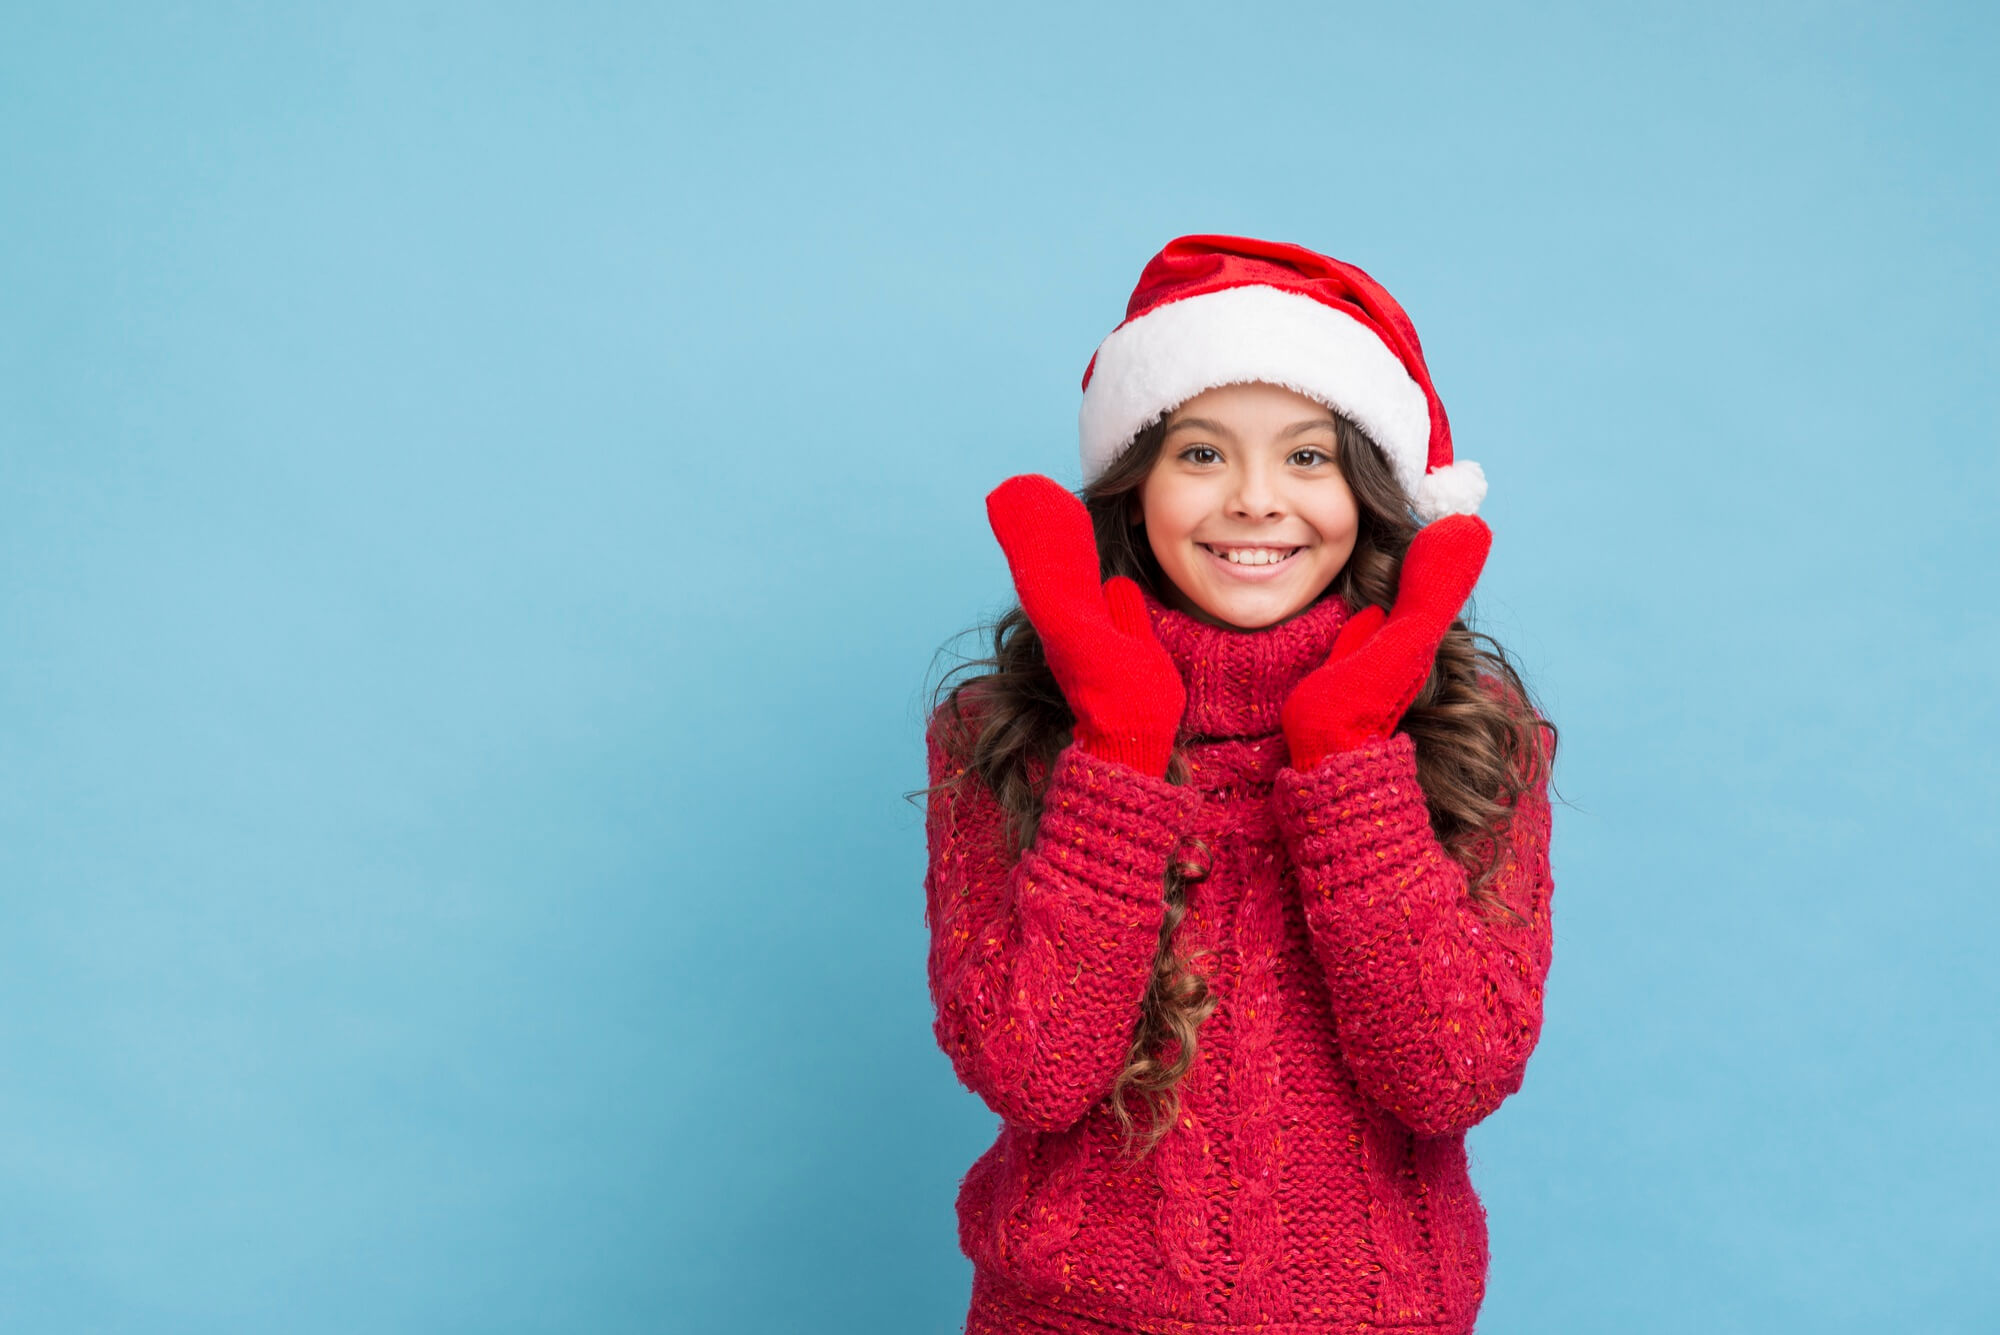 5 Dental-Friendly Stocking Stuffers for your kids this Christmas